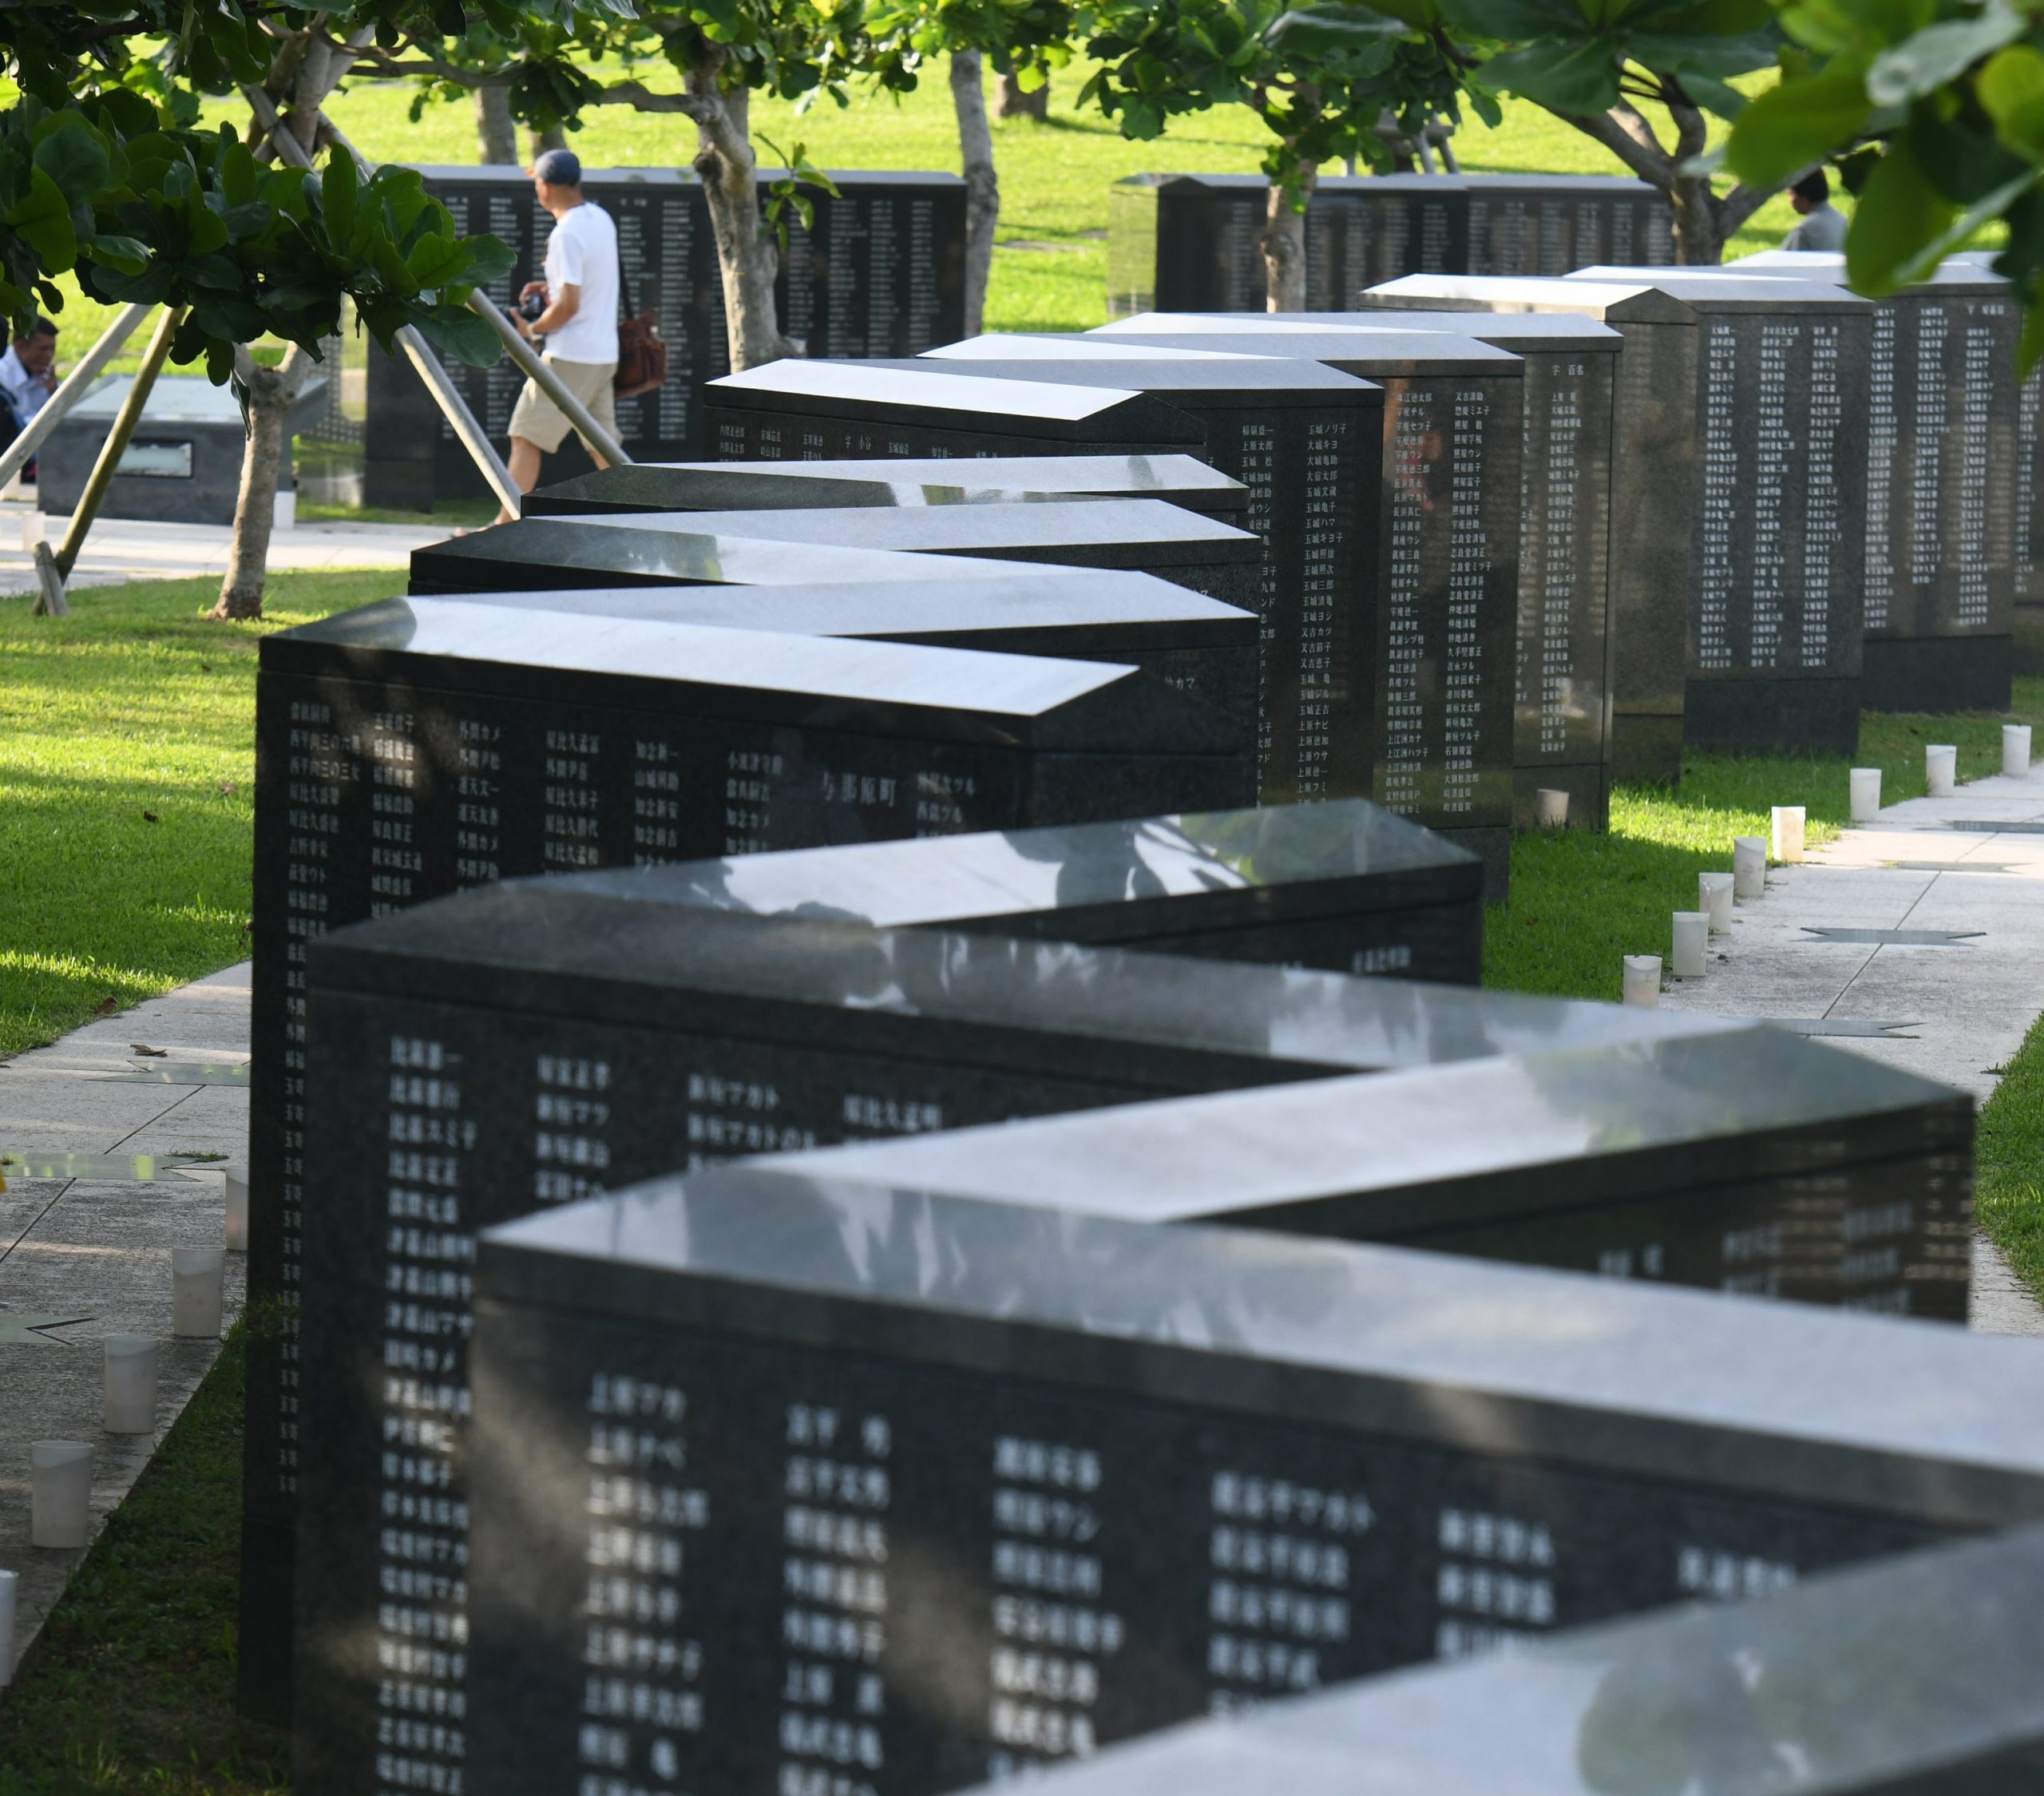 Thirty new names to be engraved on Cornerstone of Peace, bringing total to 241,593 names